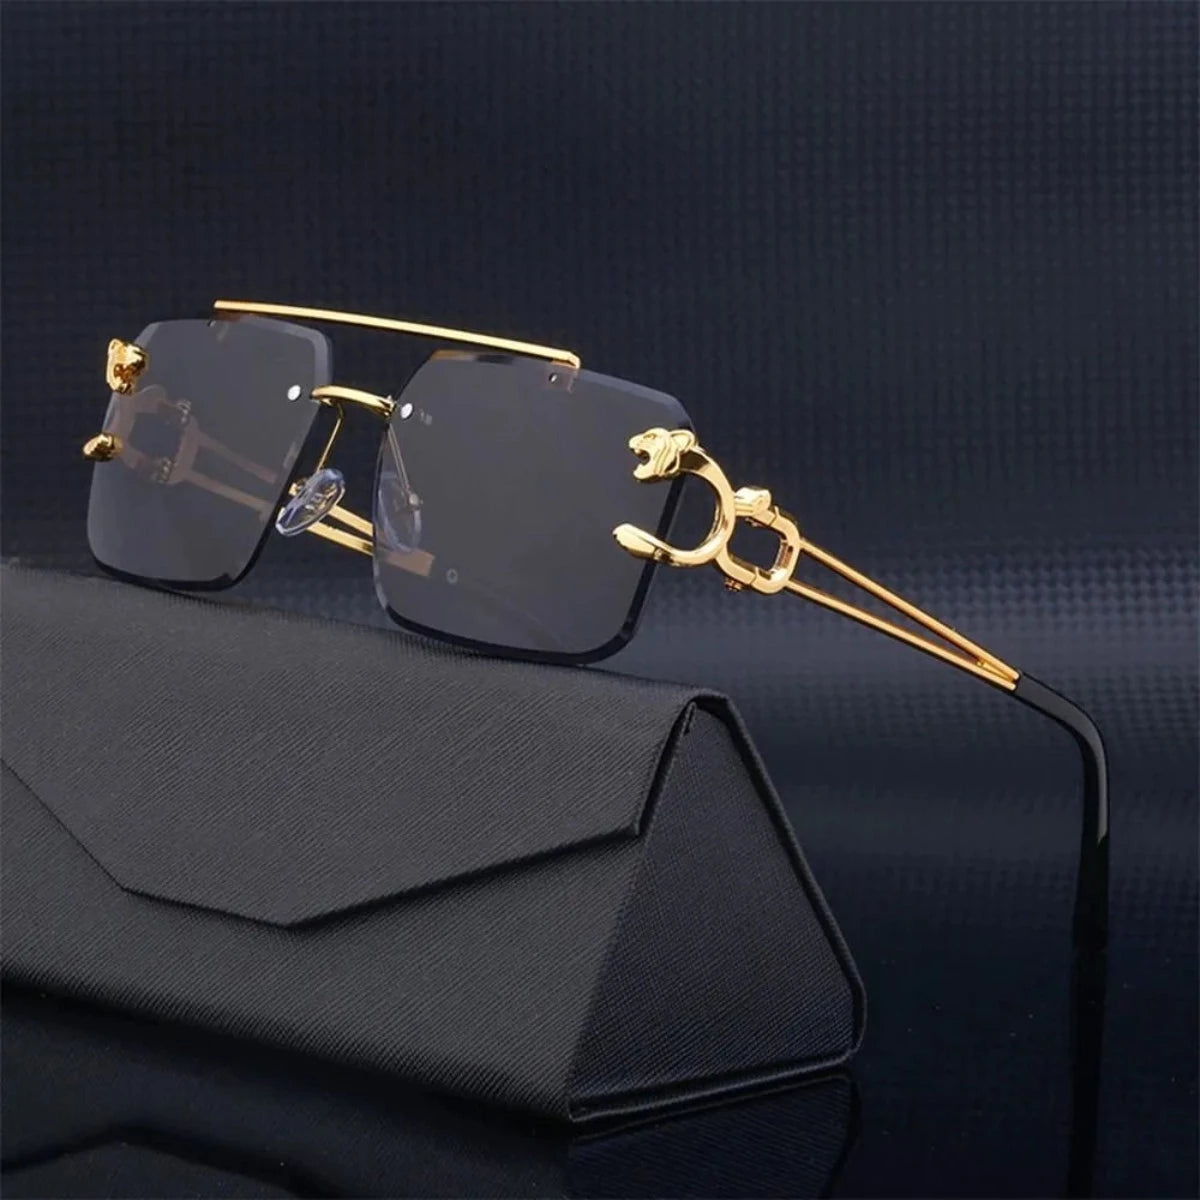 A pair of Retro Rimless Steampunk UV400 Sunglasses with gold rims on a black background.